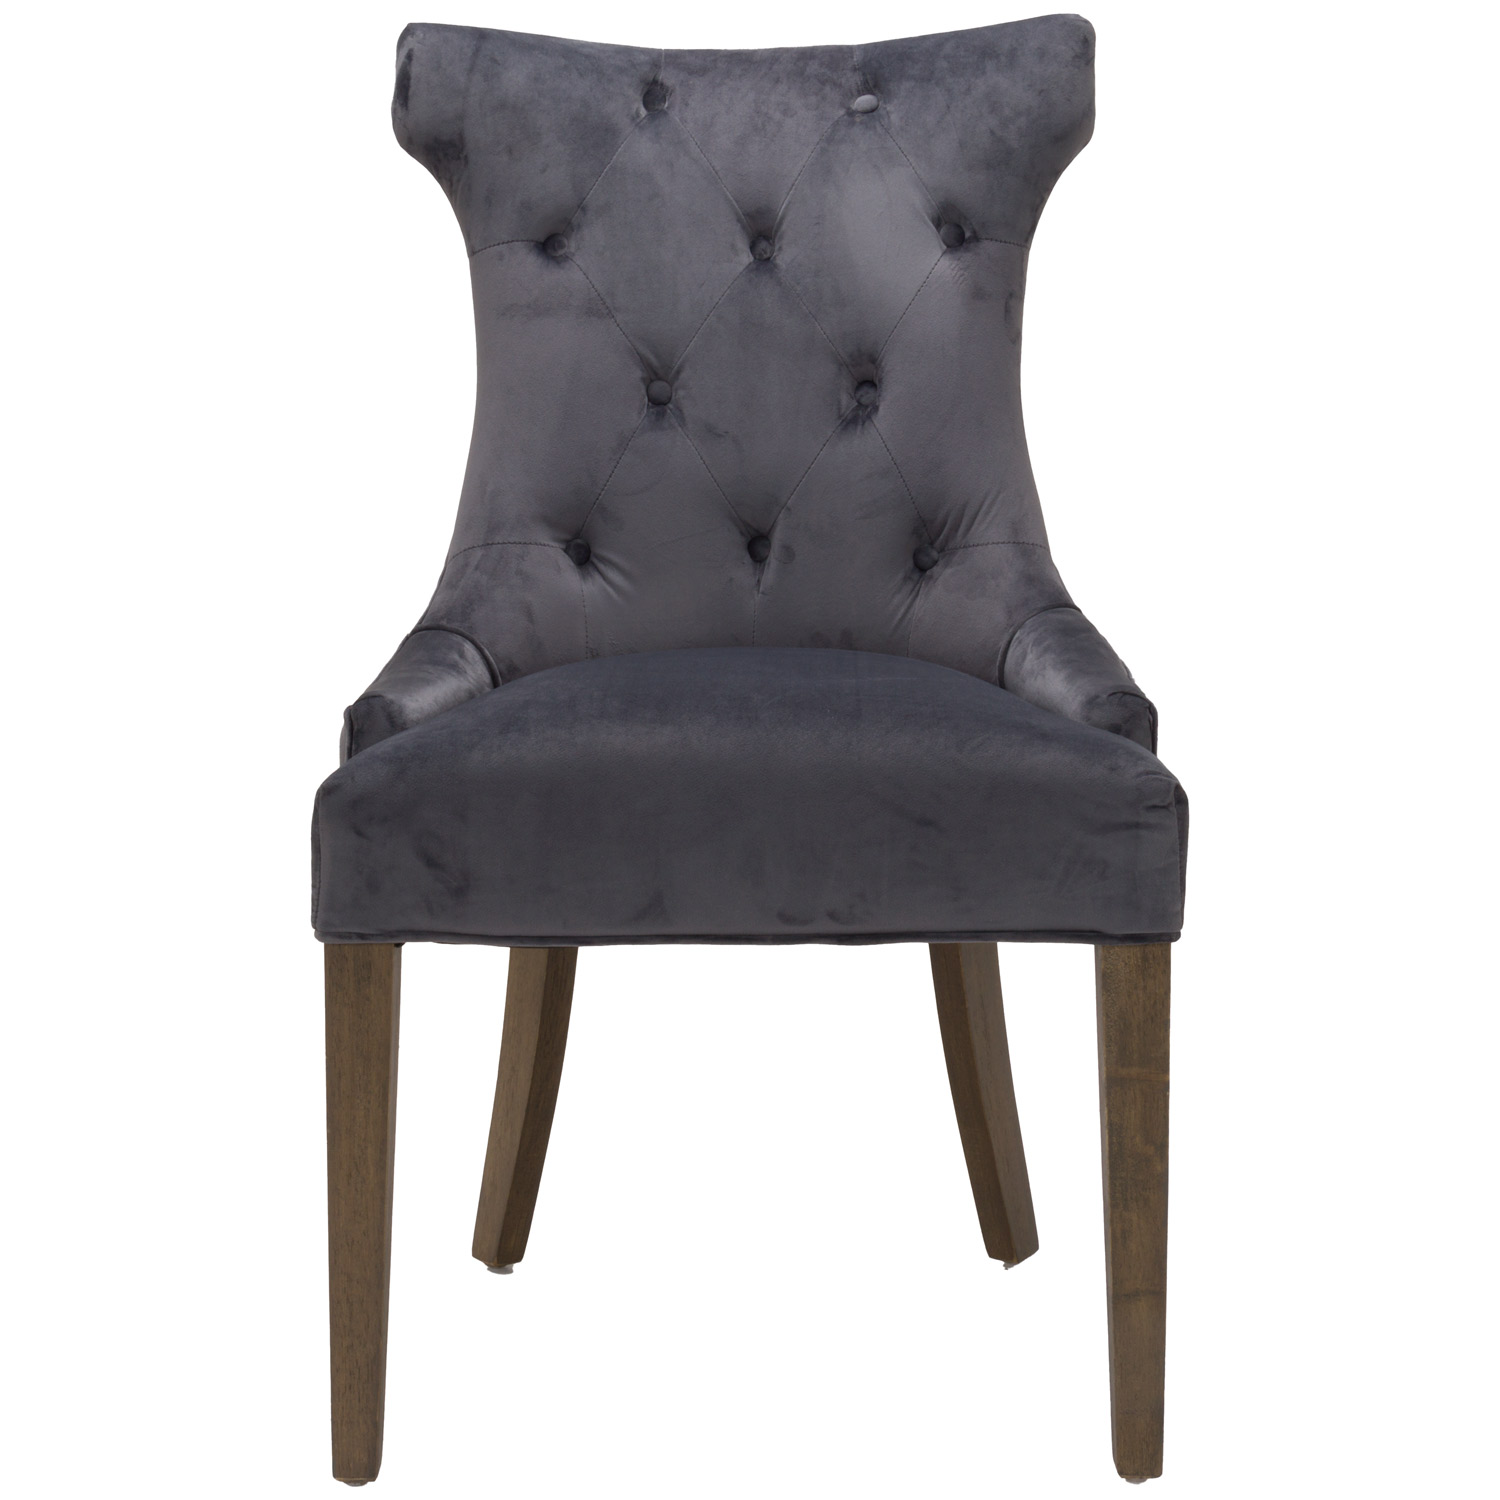 Knightsbridge High Wing Ring Backed Dining Chair - Image 2